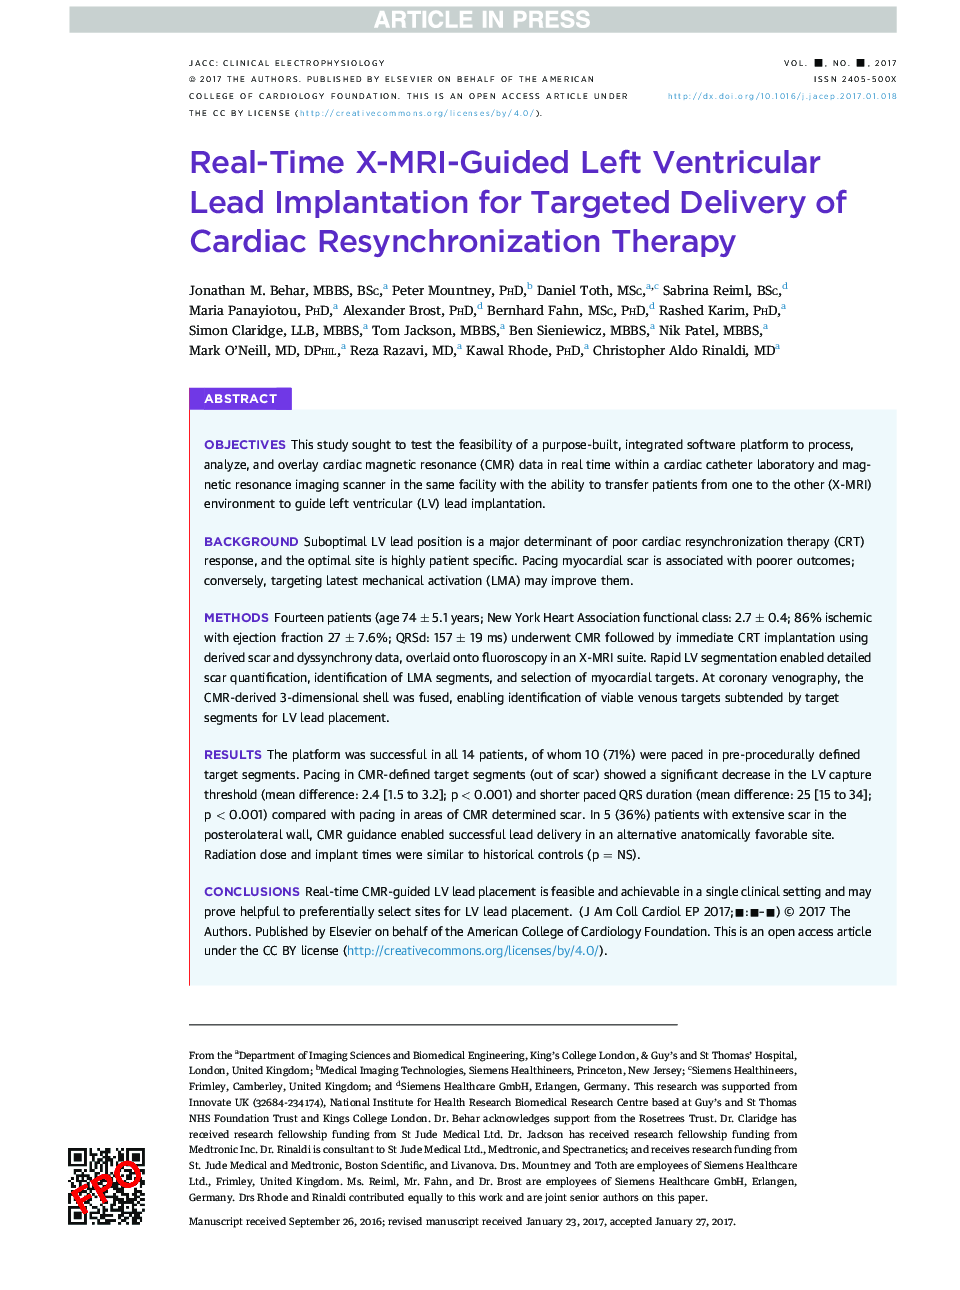 Real-Time X-MRI-Guided Left Ventricular Lead Implantation for Targeted Delivery ofÂ Cardiac Resynchronization Therapy